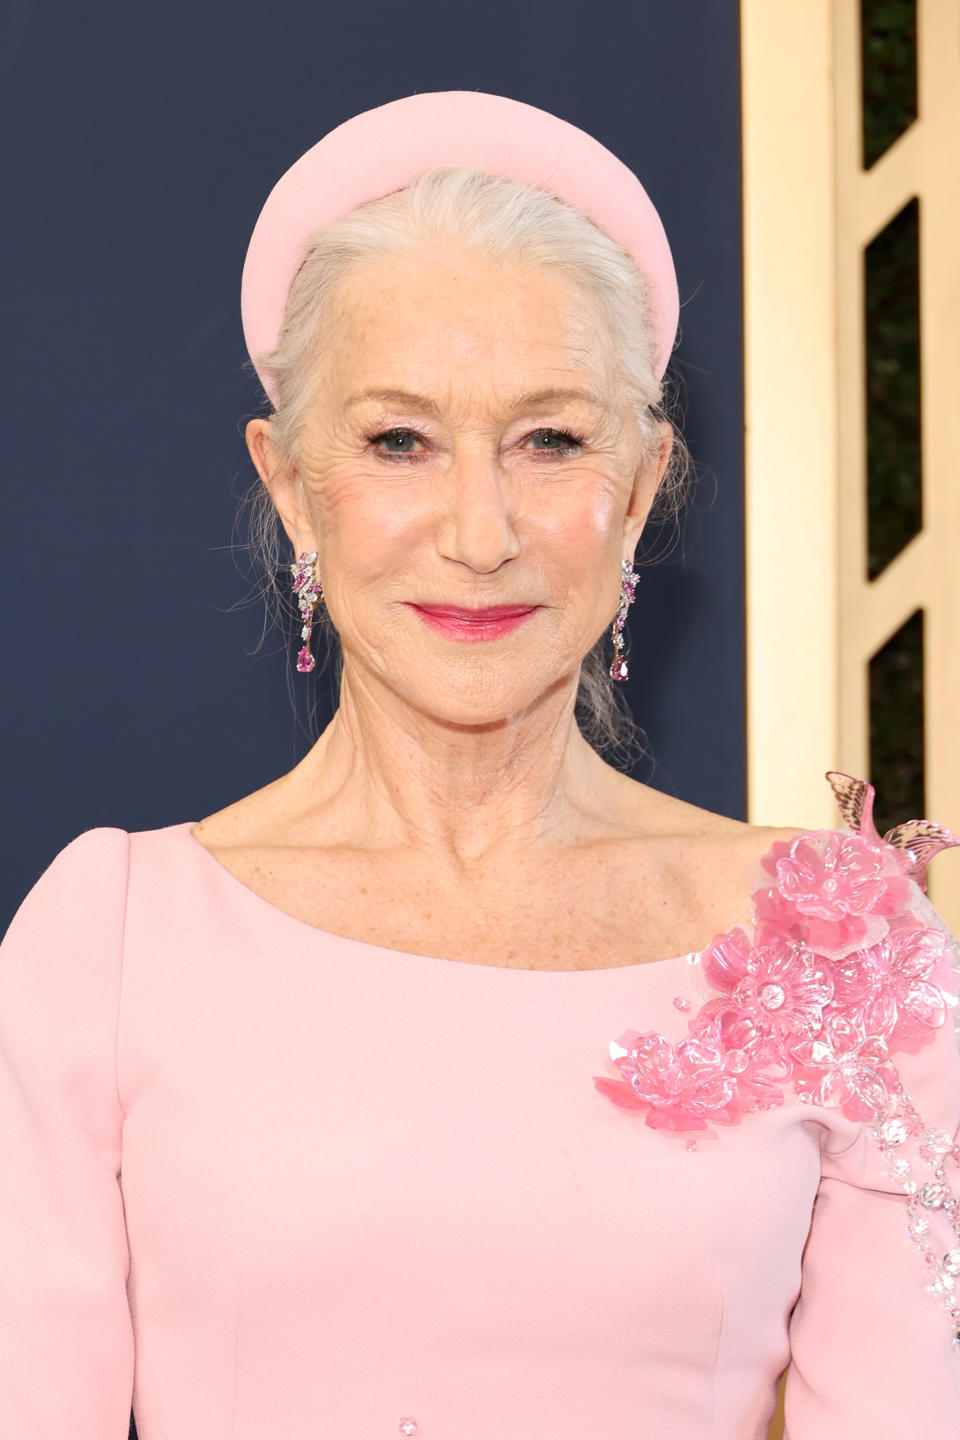 The actors blush ensemble was complimented by Mirren's equally rosy complexion. (Getty Images) 